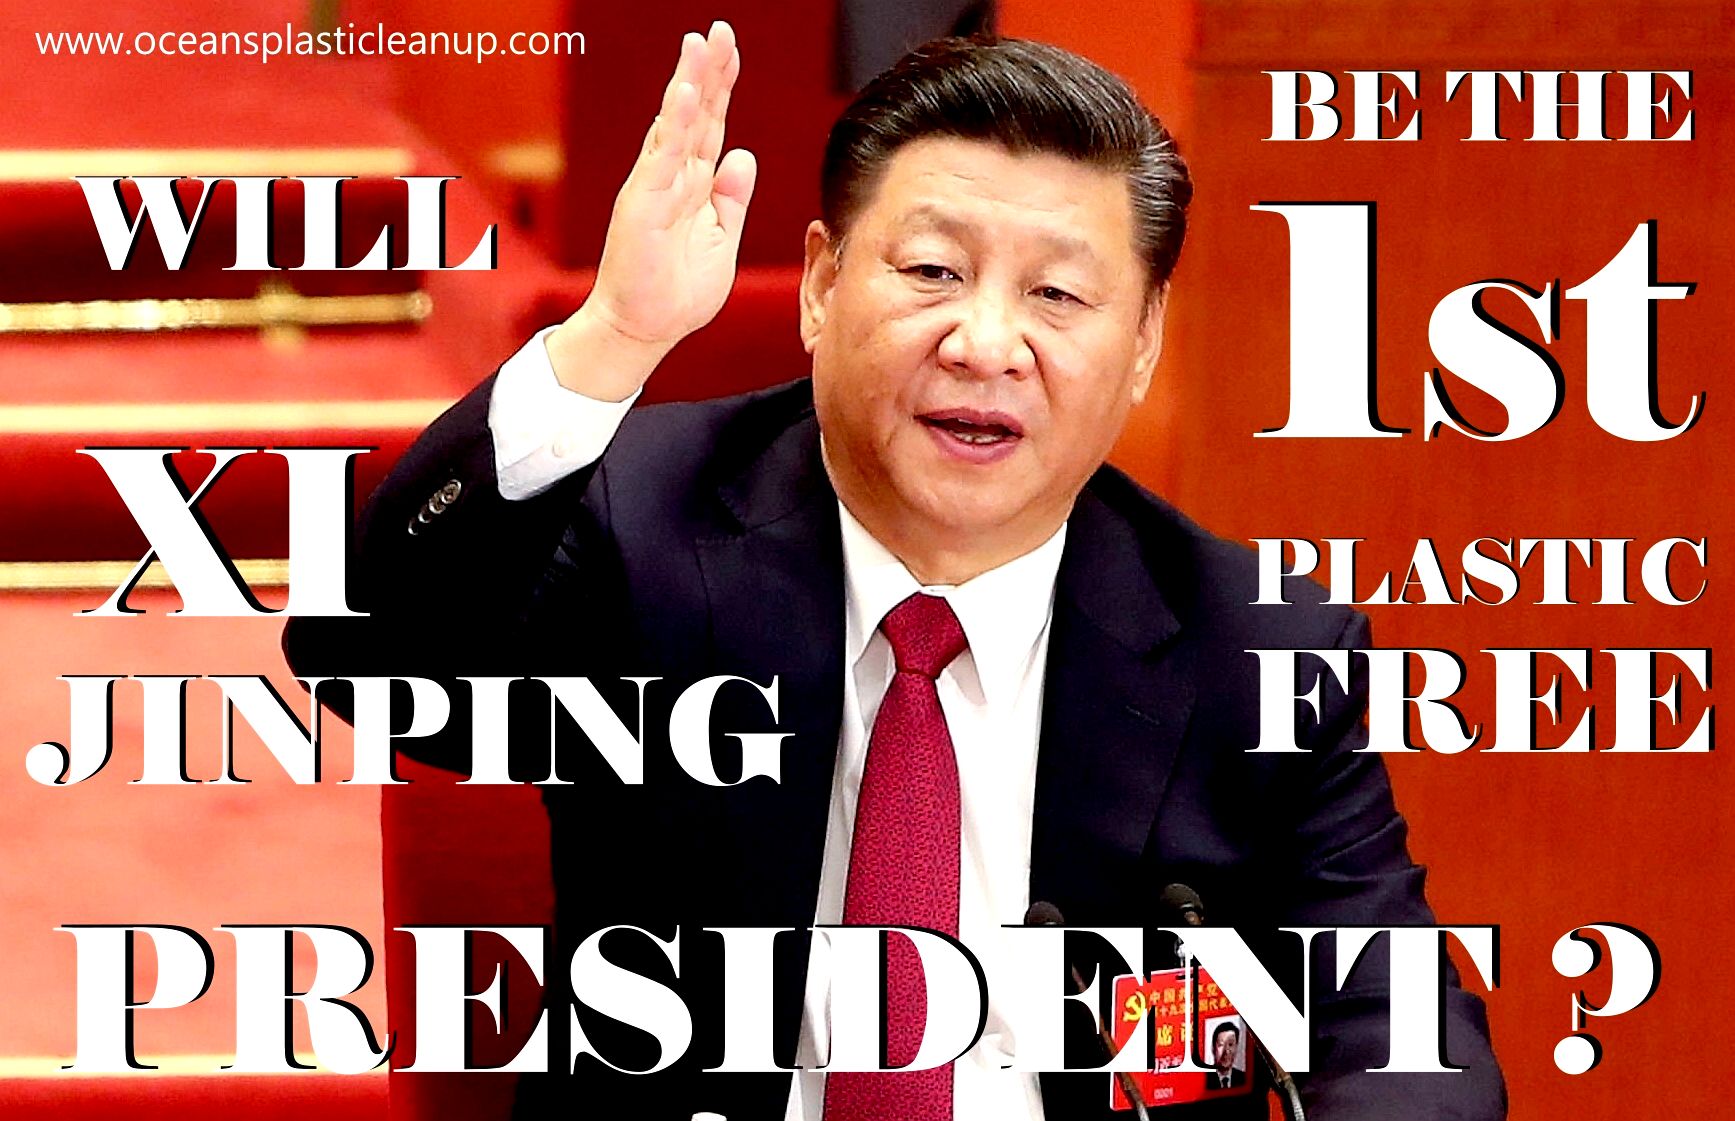 Could Xi Jinping be the first plastic free President of China ?